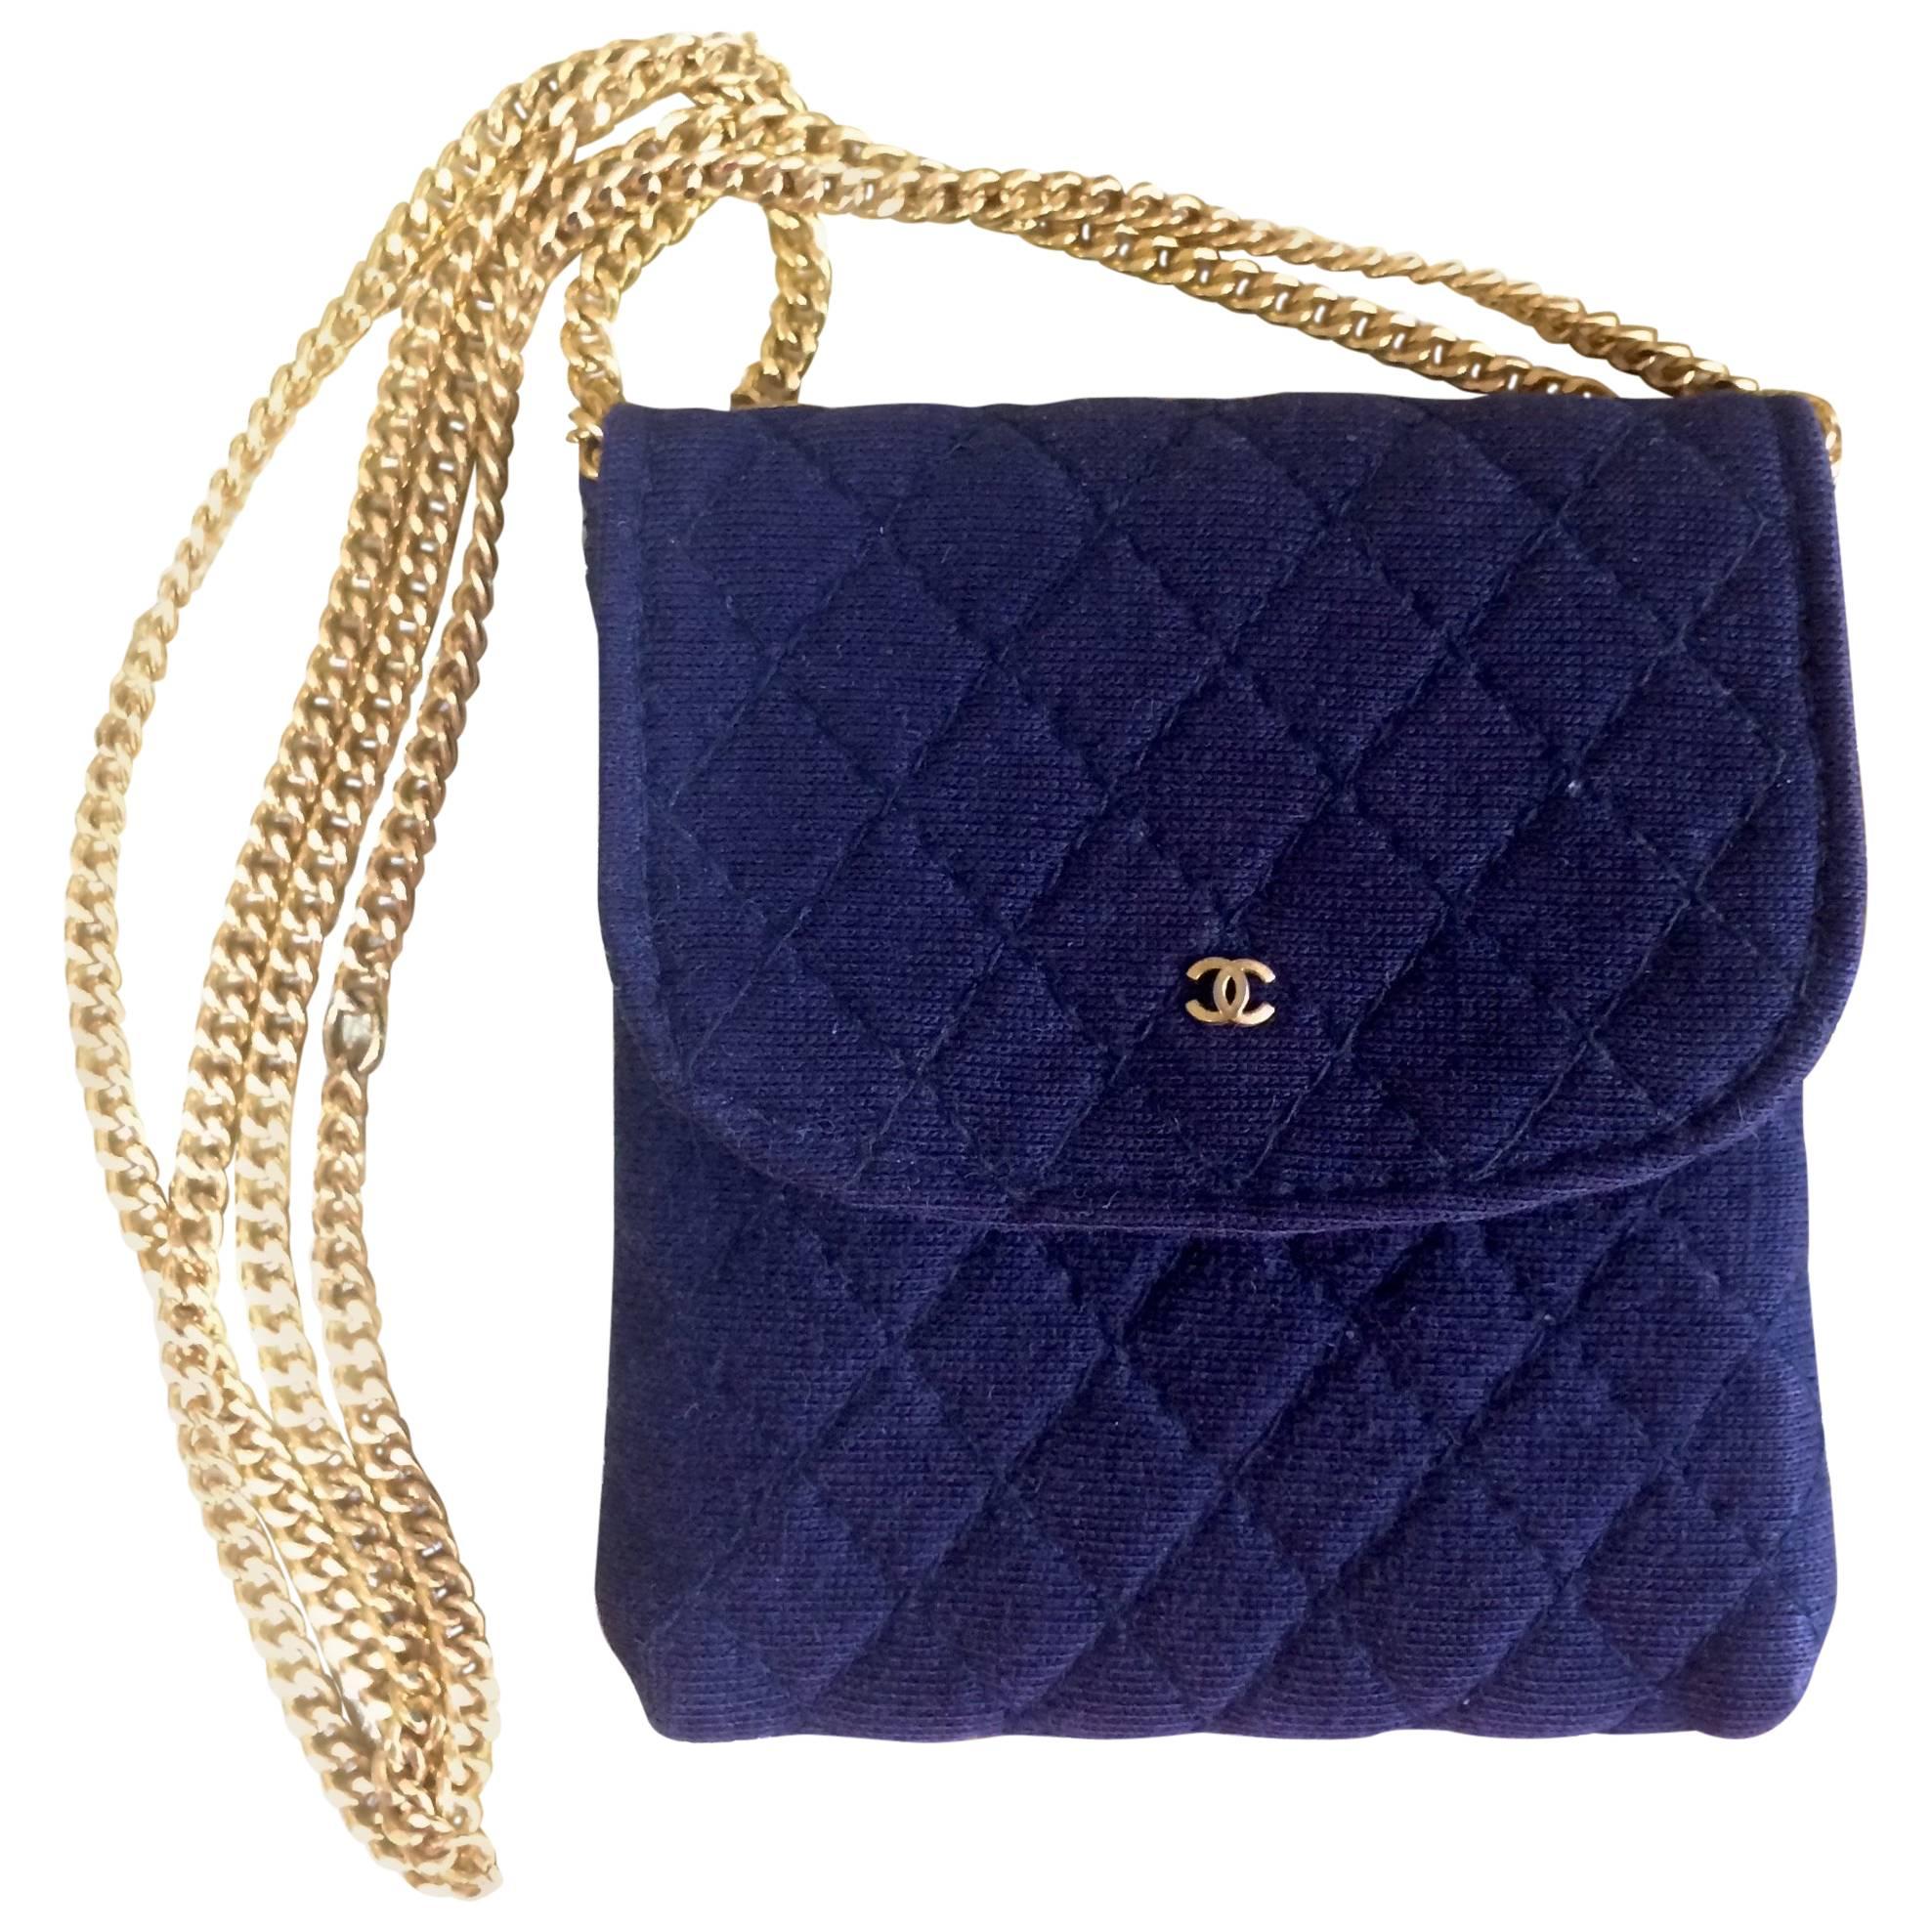 Vintage Chanel navy quilted jersey fabric mini pouch, coin purse, long necklace.